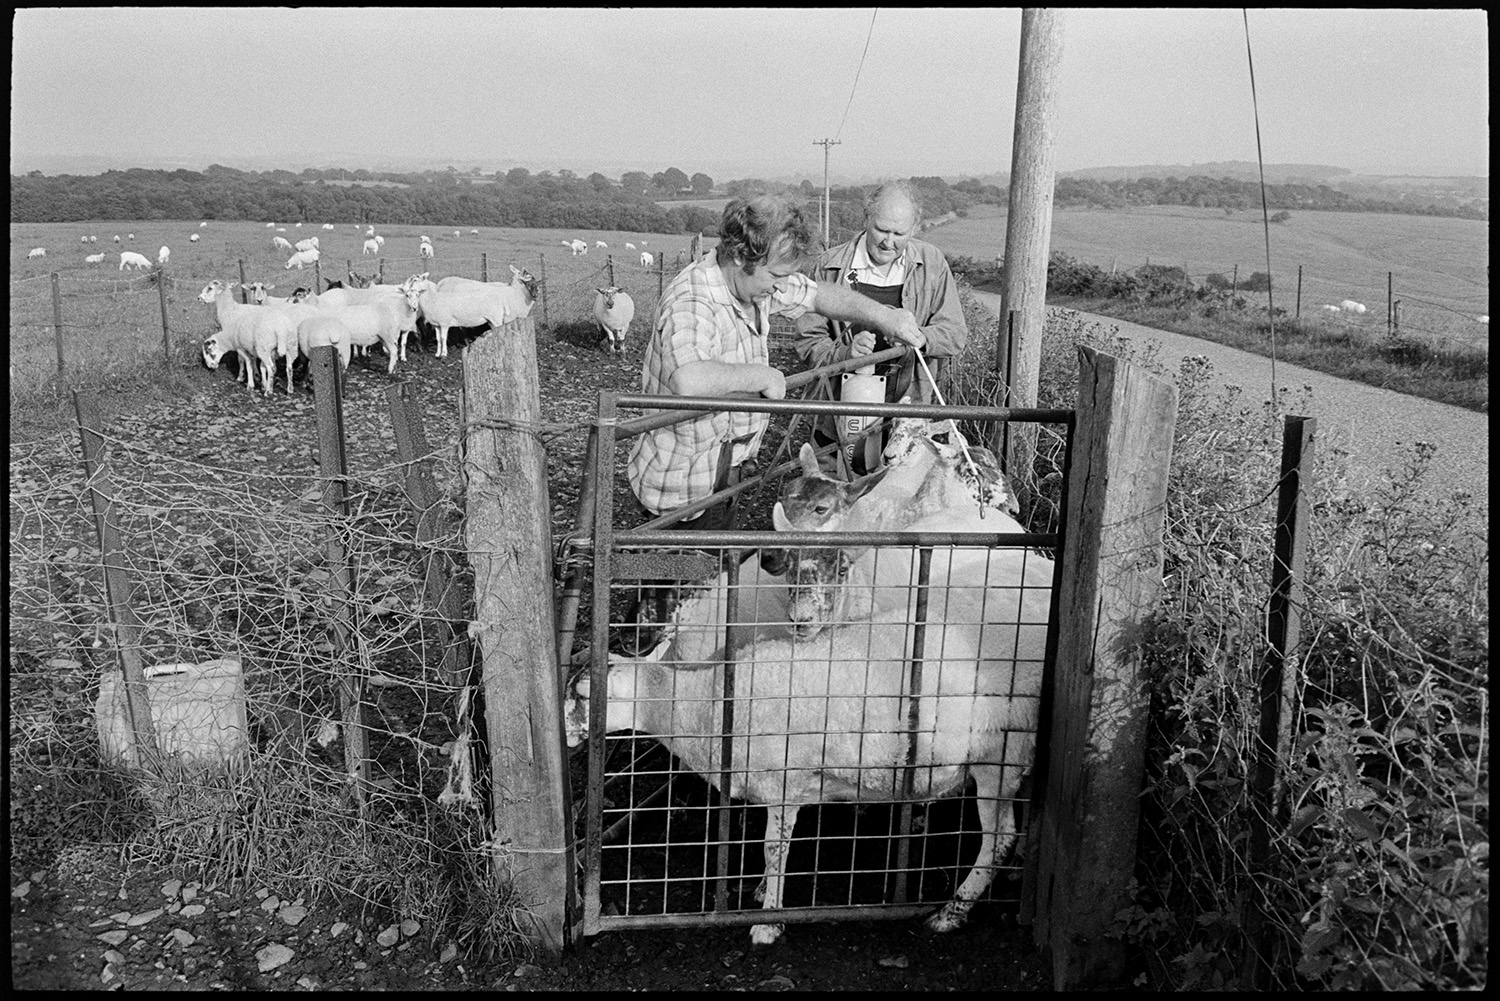 Farmers checking sheep on moor held in pen.
[Two men checking sheep in a metal pen on Hatherleigh Moor. Sheep can be seen in a field in the background, next to a road and telegraph poles.]